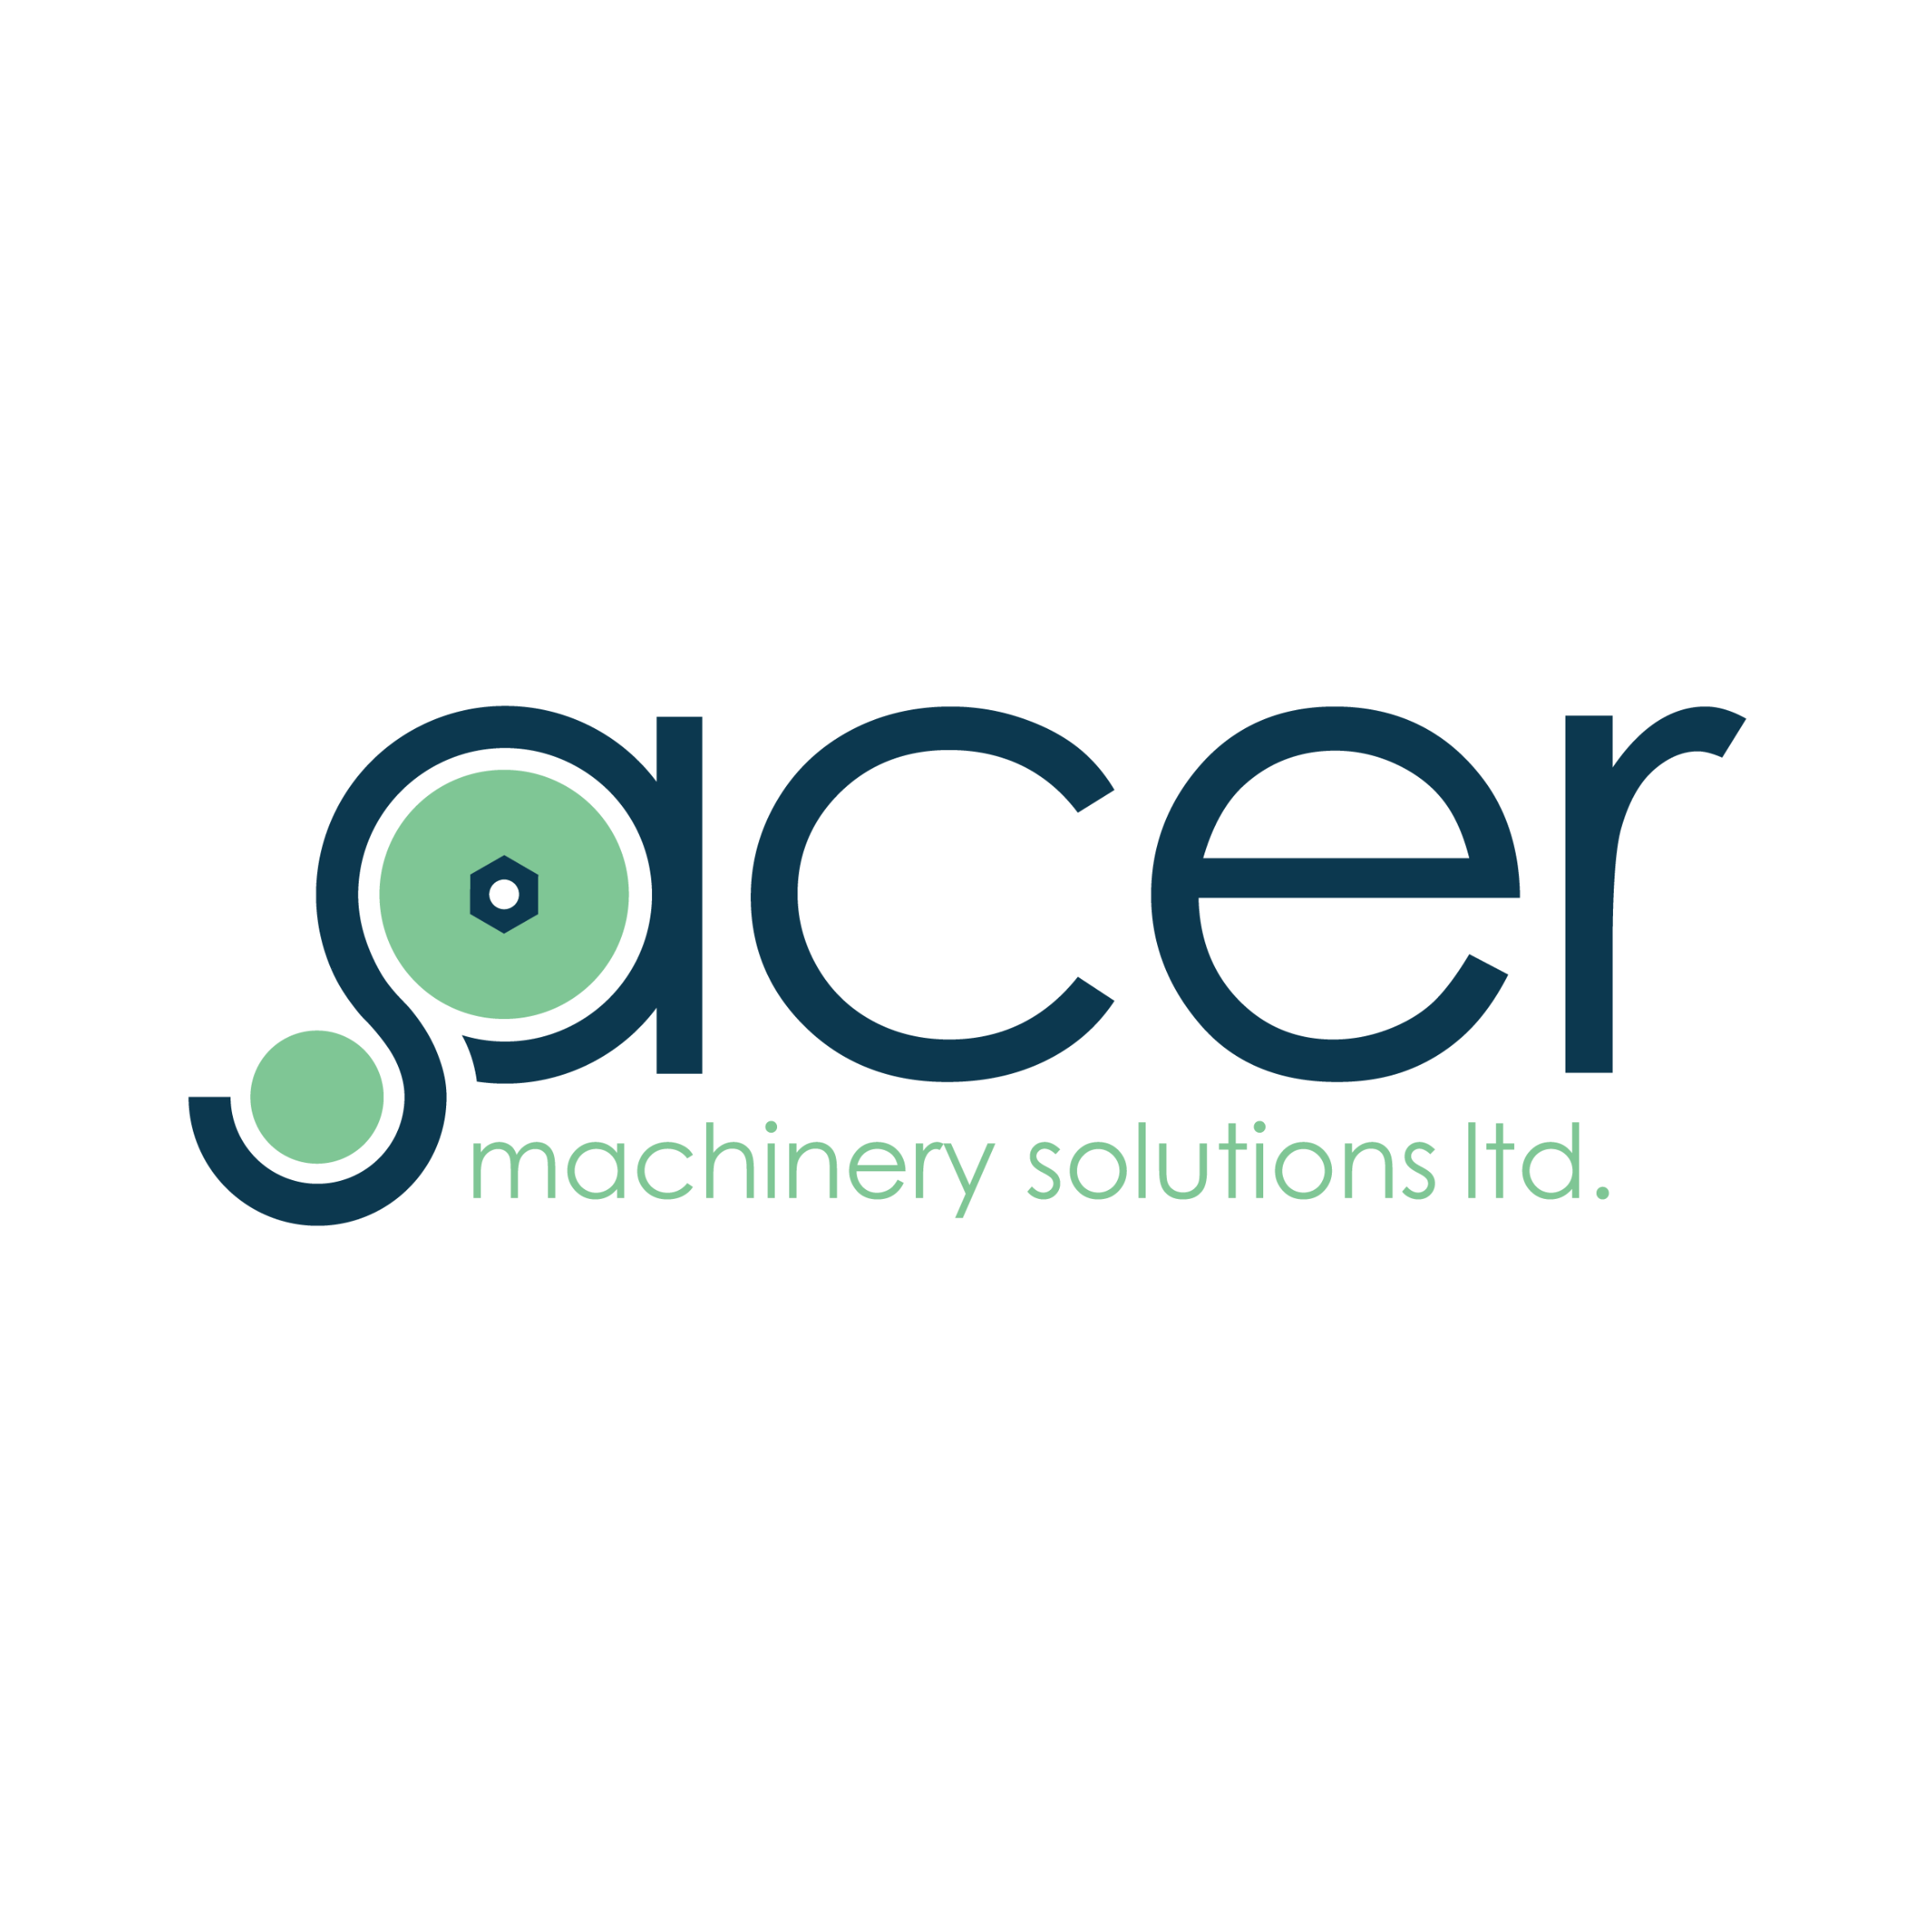 Acer Machinery Solutions Logo